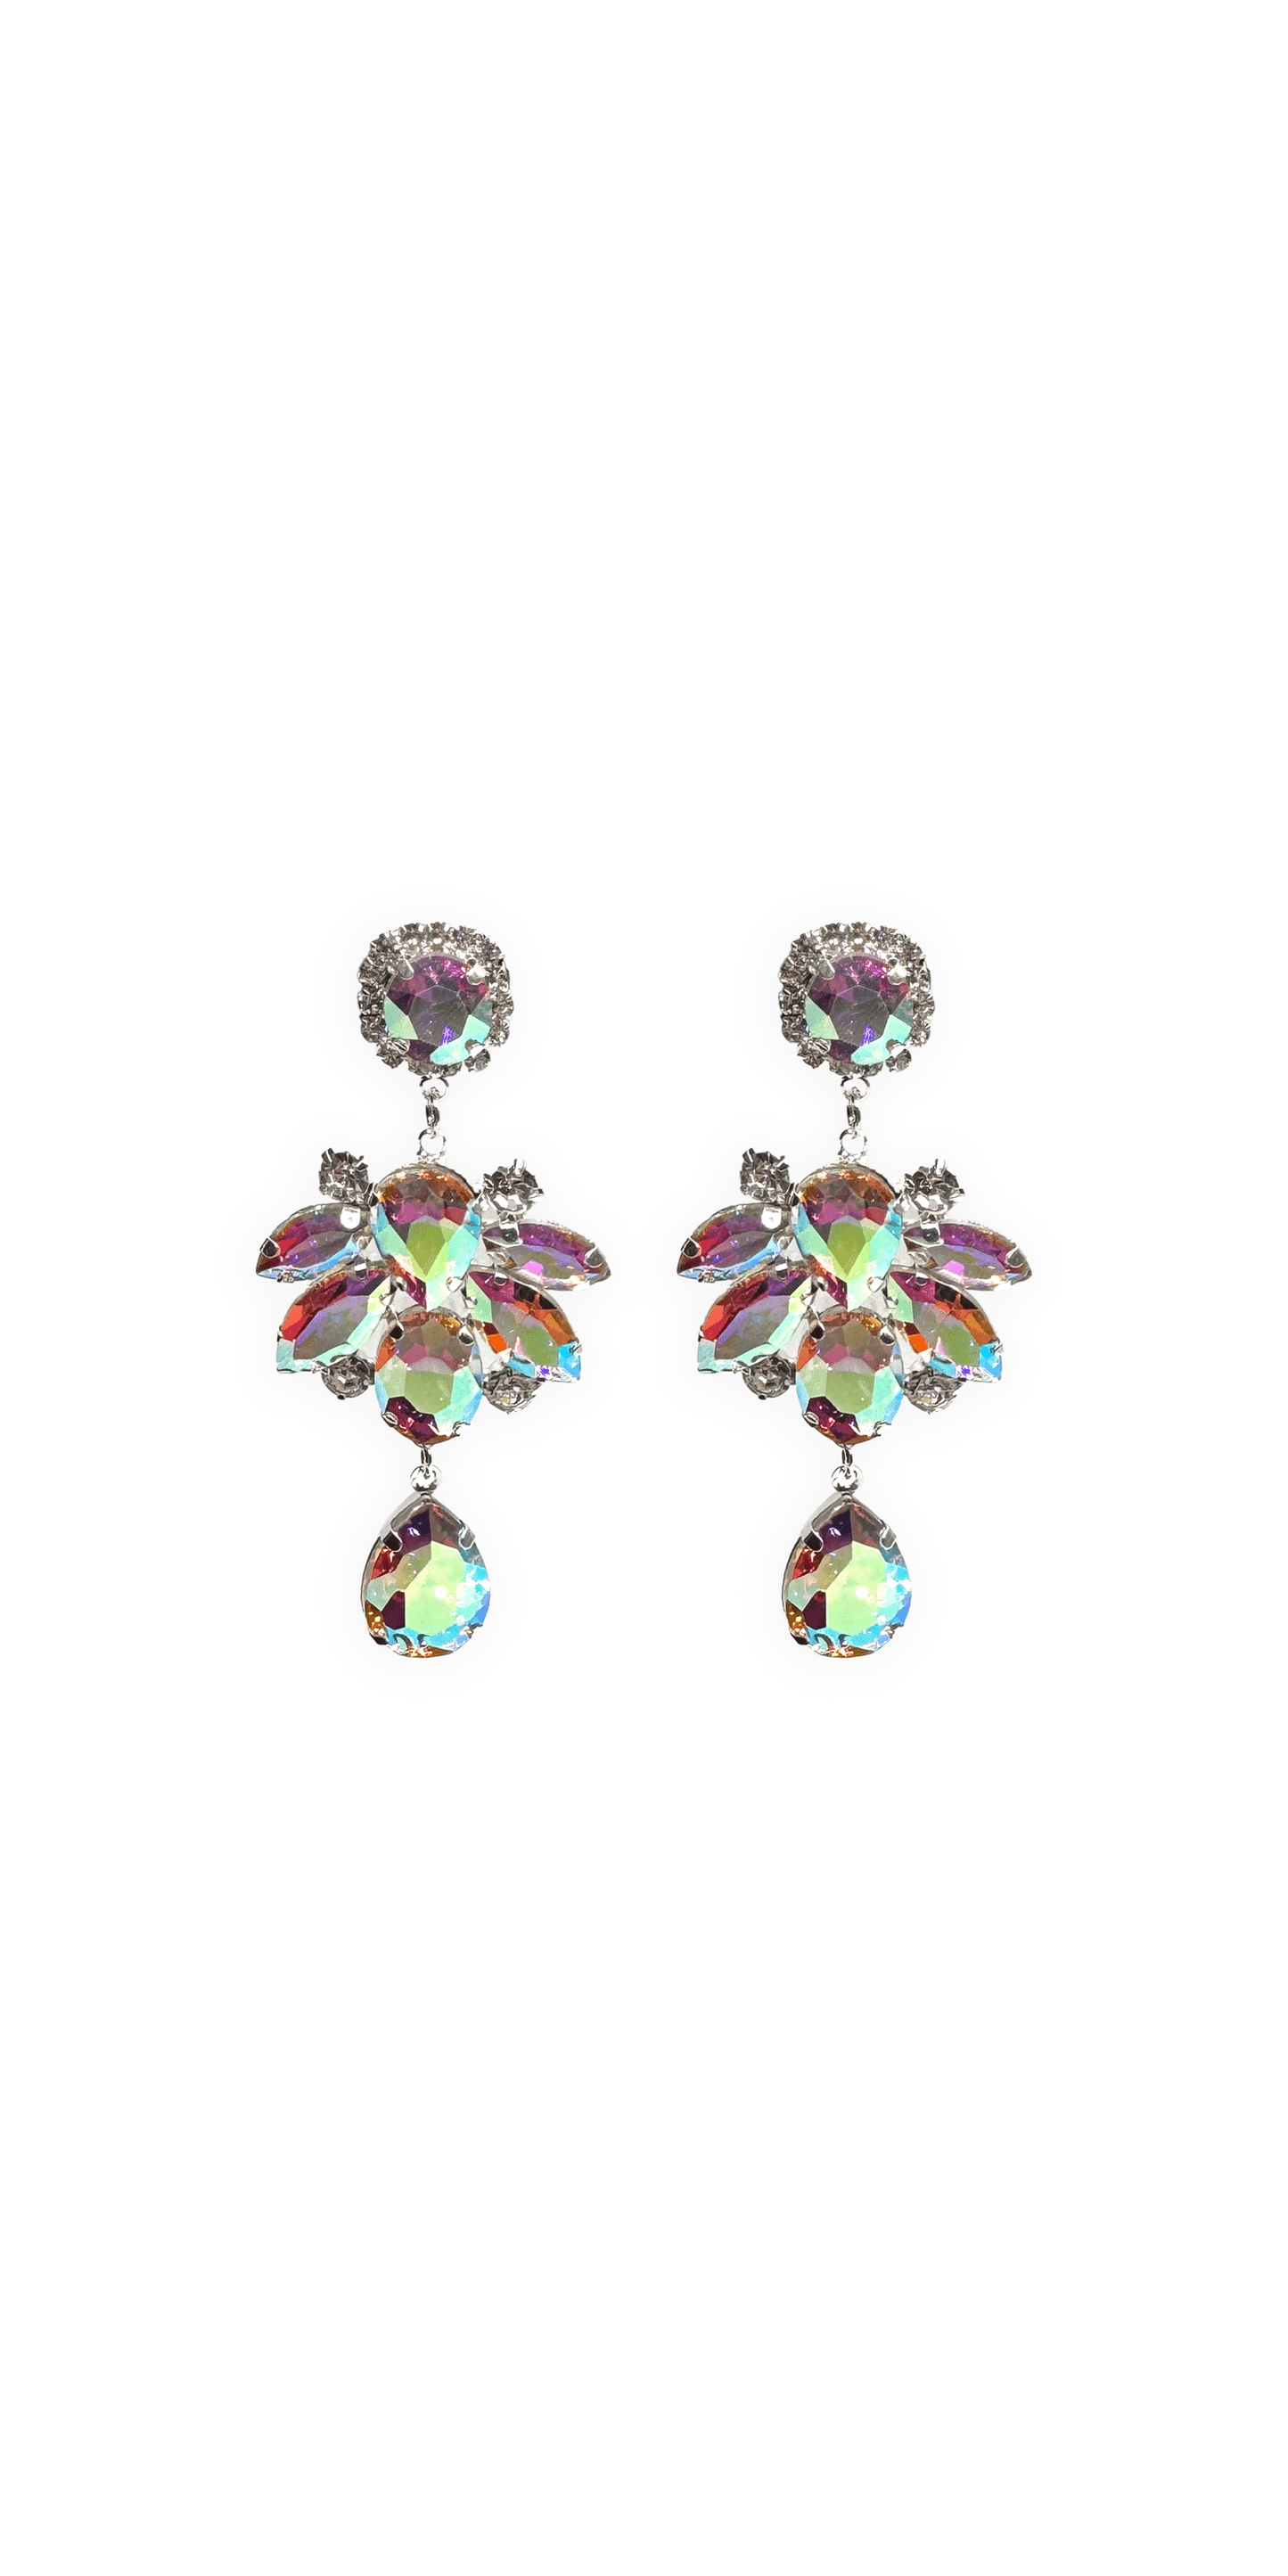 Camille La Vie Chunky Cluster Iridescent Double Drop Earrings one-size / silver